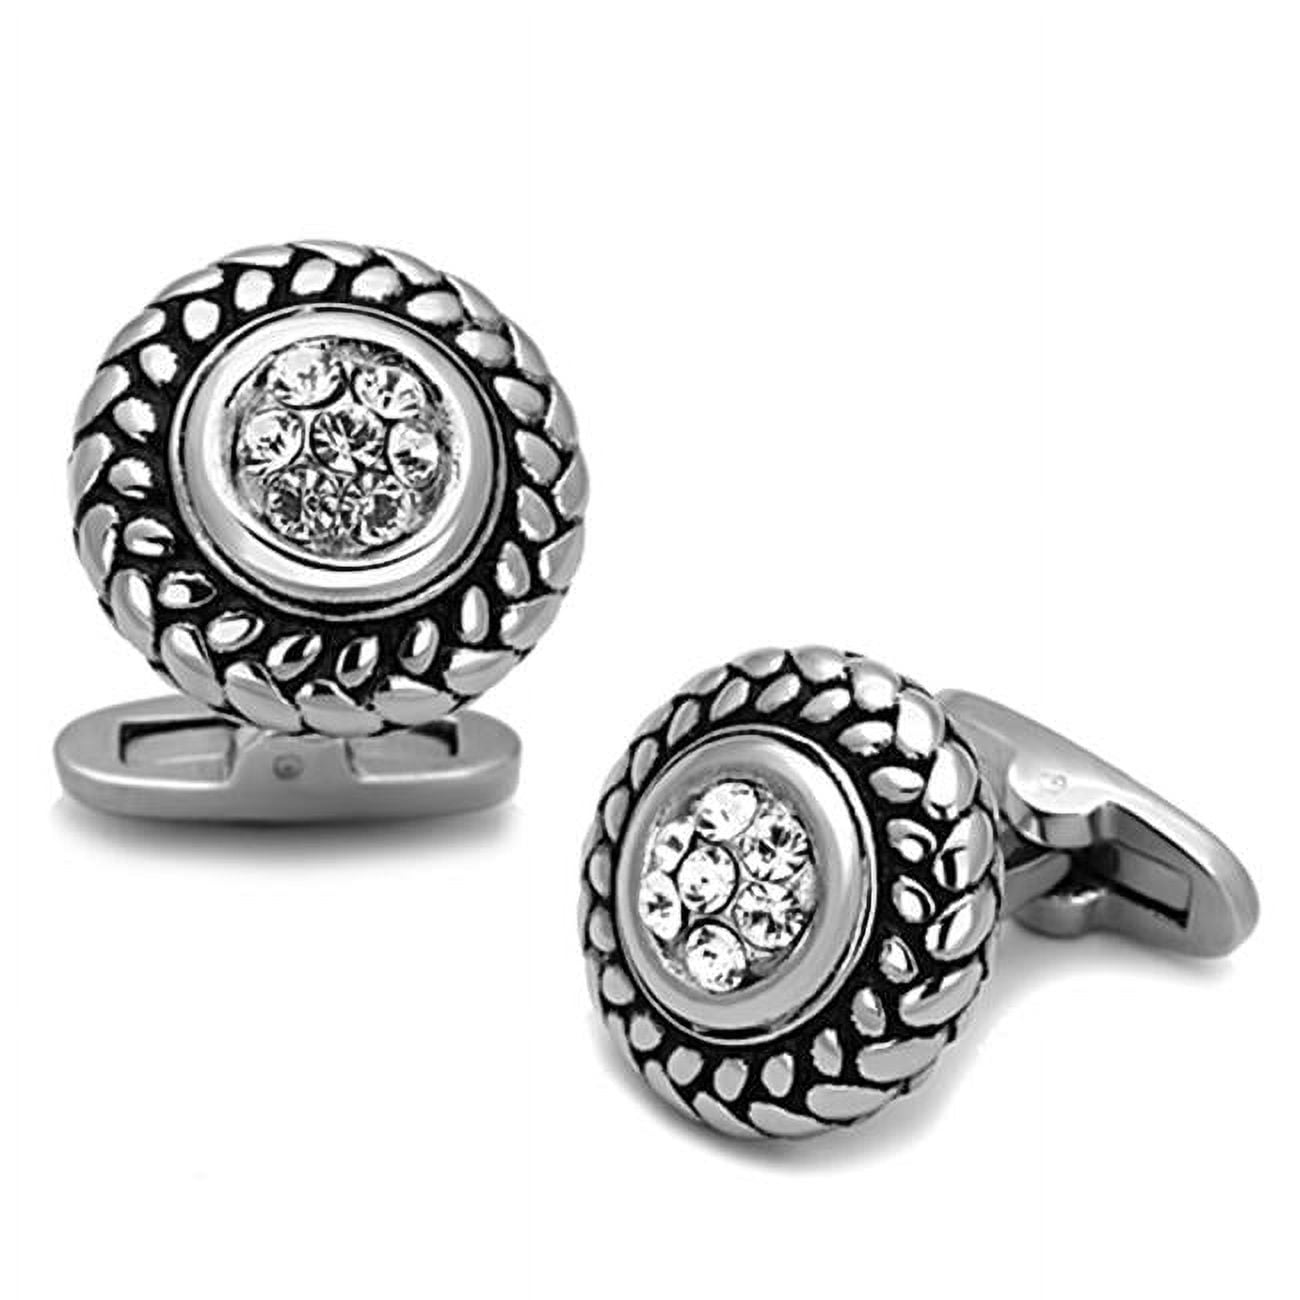 Picture of Alamode TK1261 Men High Polished Stainless Steel Cufflink with Top Grade Crystal in Clear